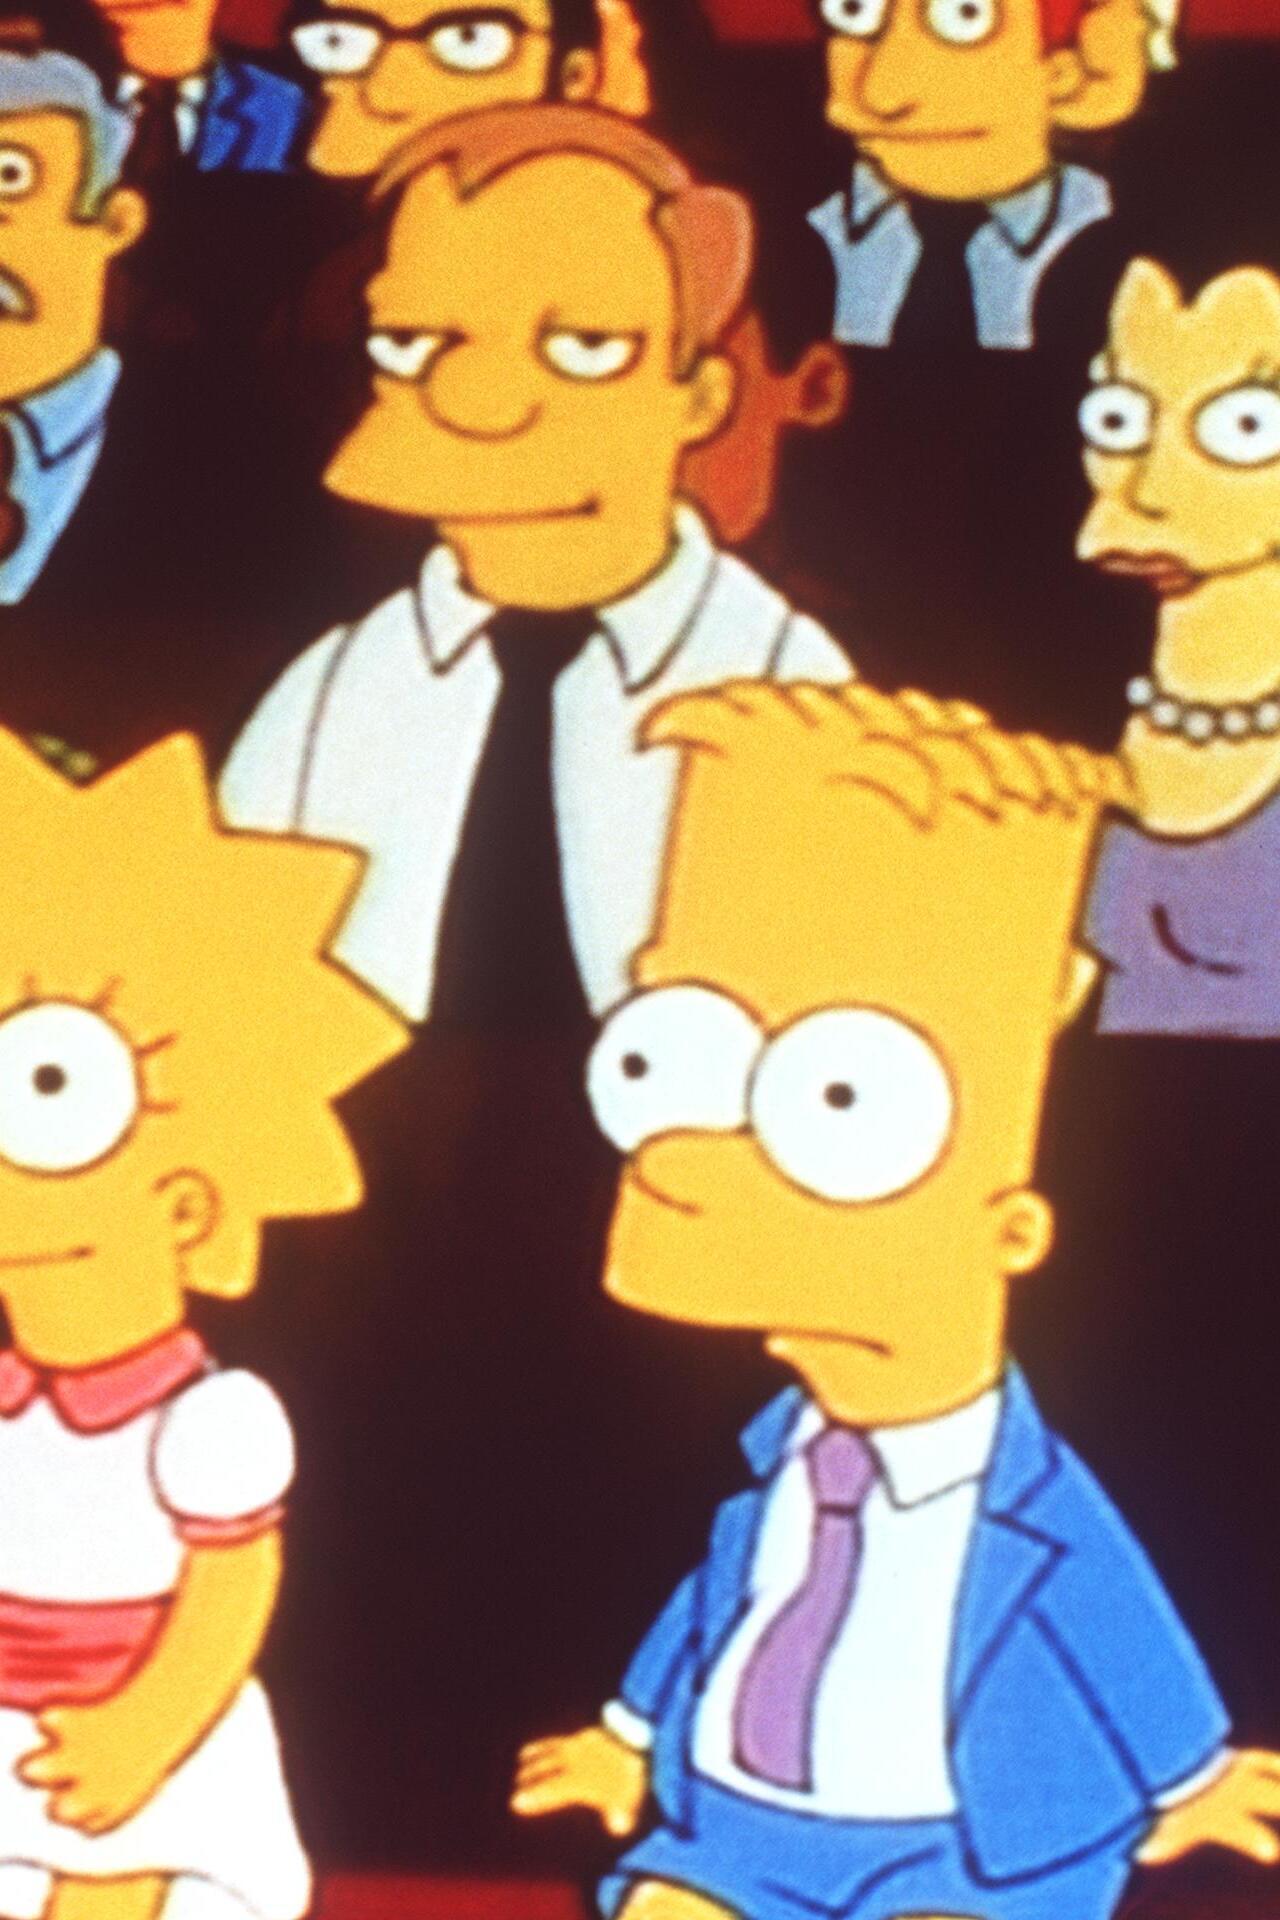 The Simpsons - The Boy Who Knew Too Much